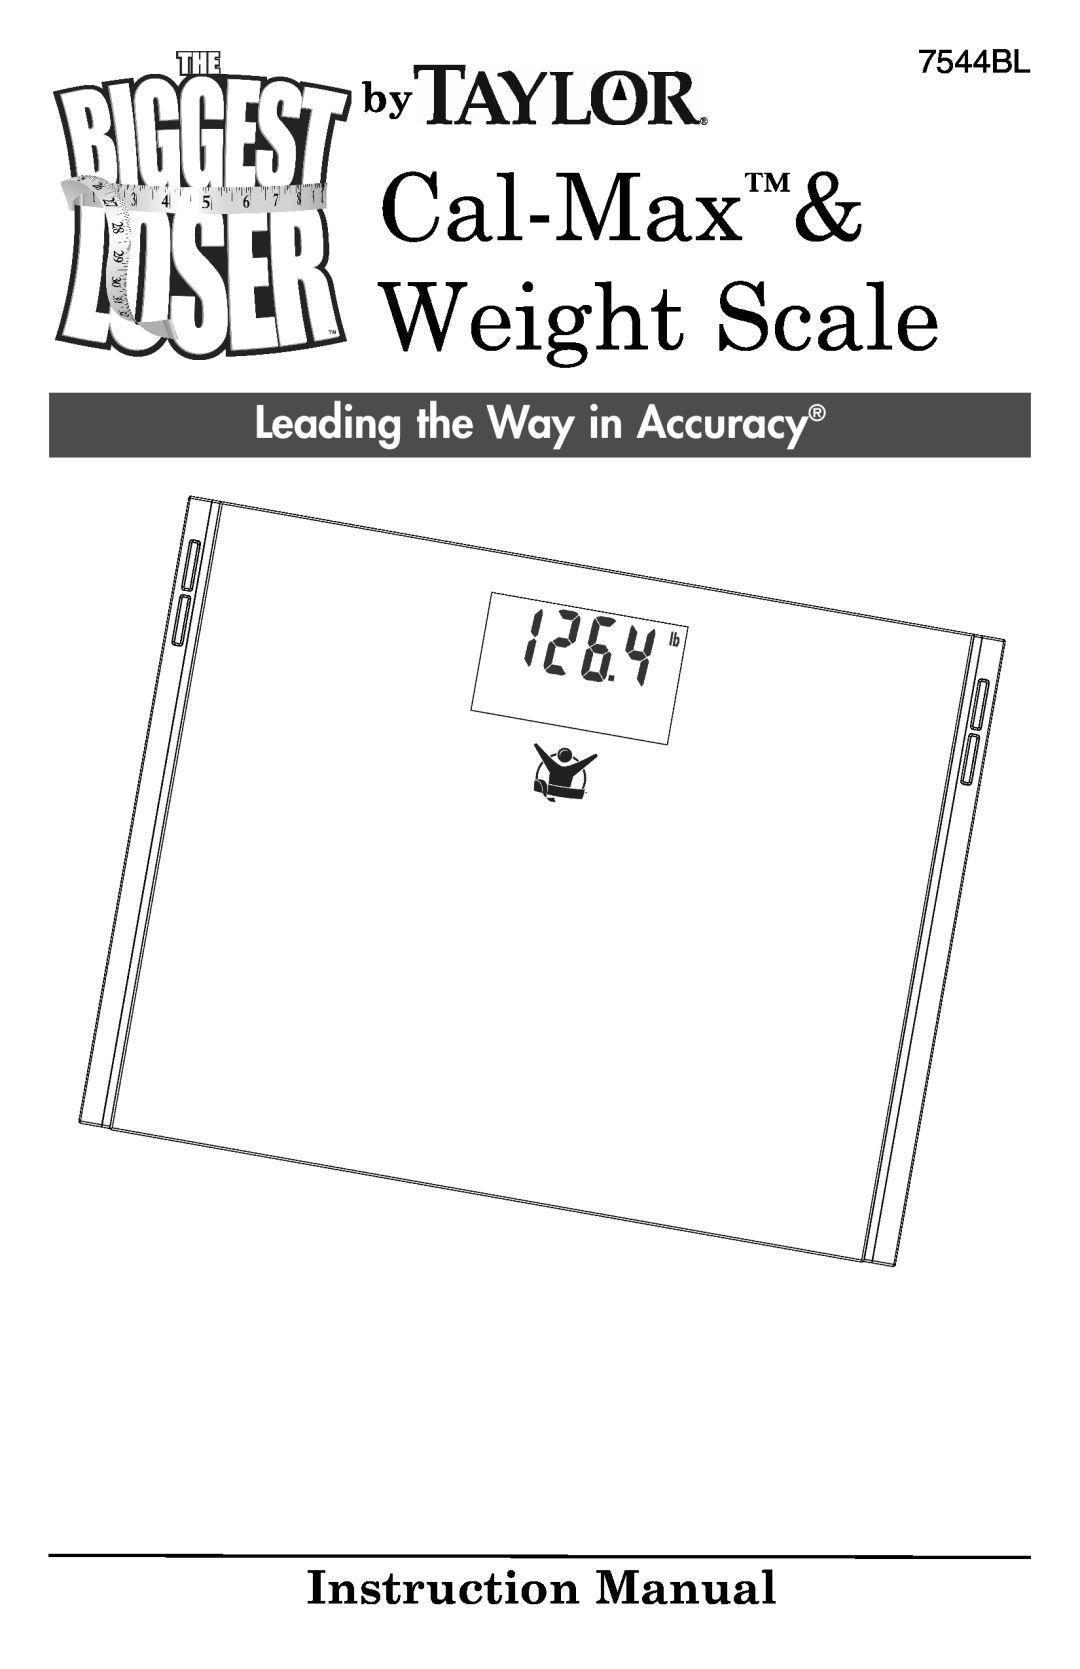 Taylor instruction manual Cal-Max Weight Scale, Instruction Manual, Leading the Way in Accuracy, by7544BL 